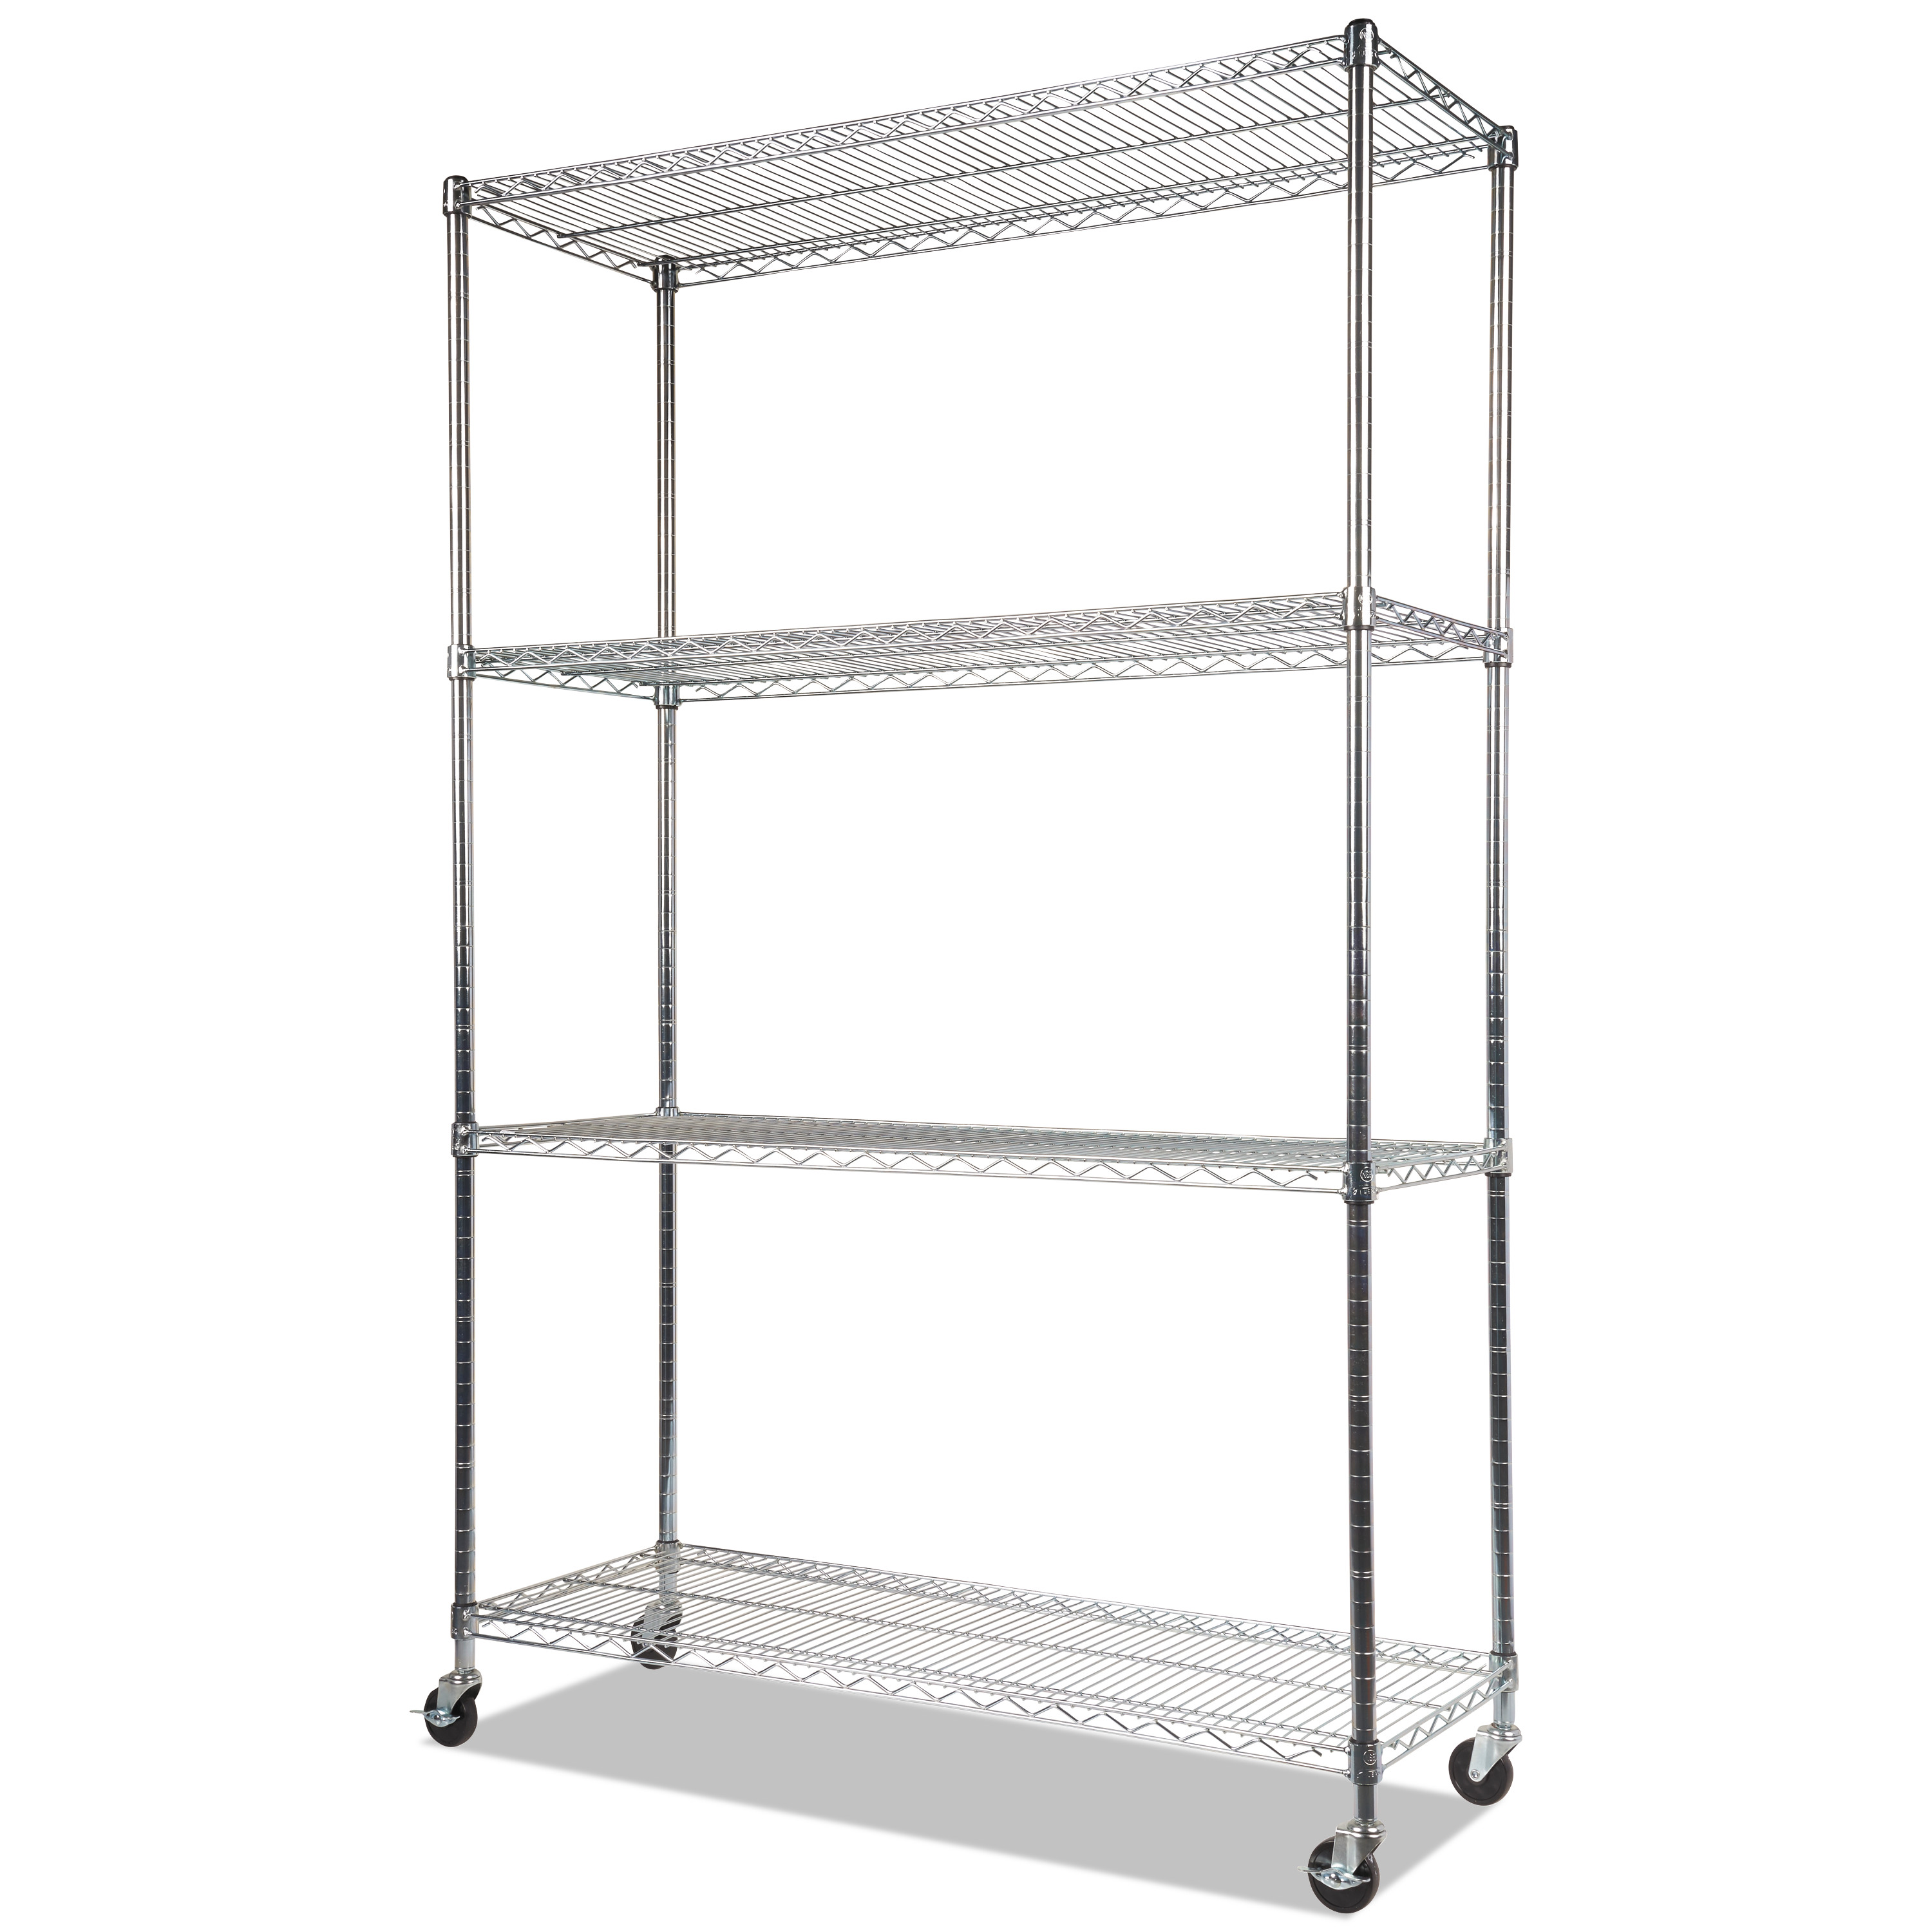 NSF Certified 4-Shelf Wire Shelving Kit with Casters, 48w x 18d x 72h, Silver